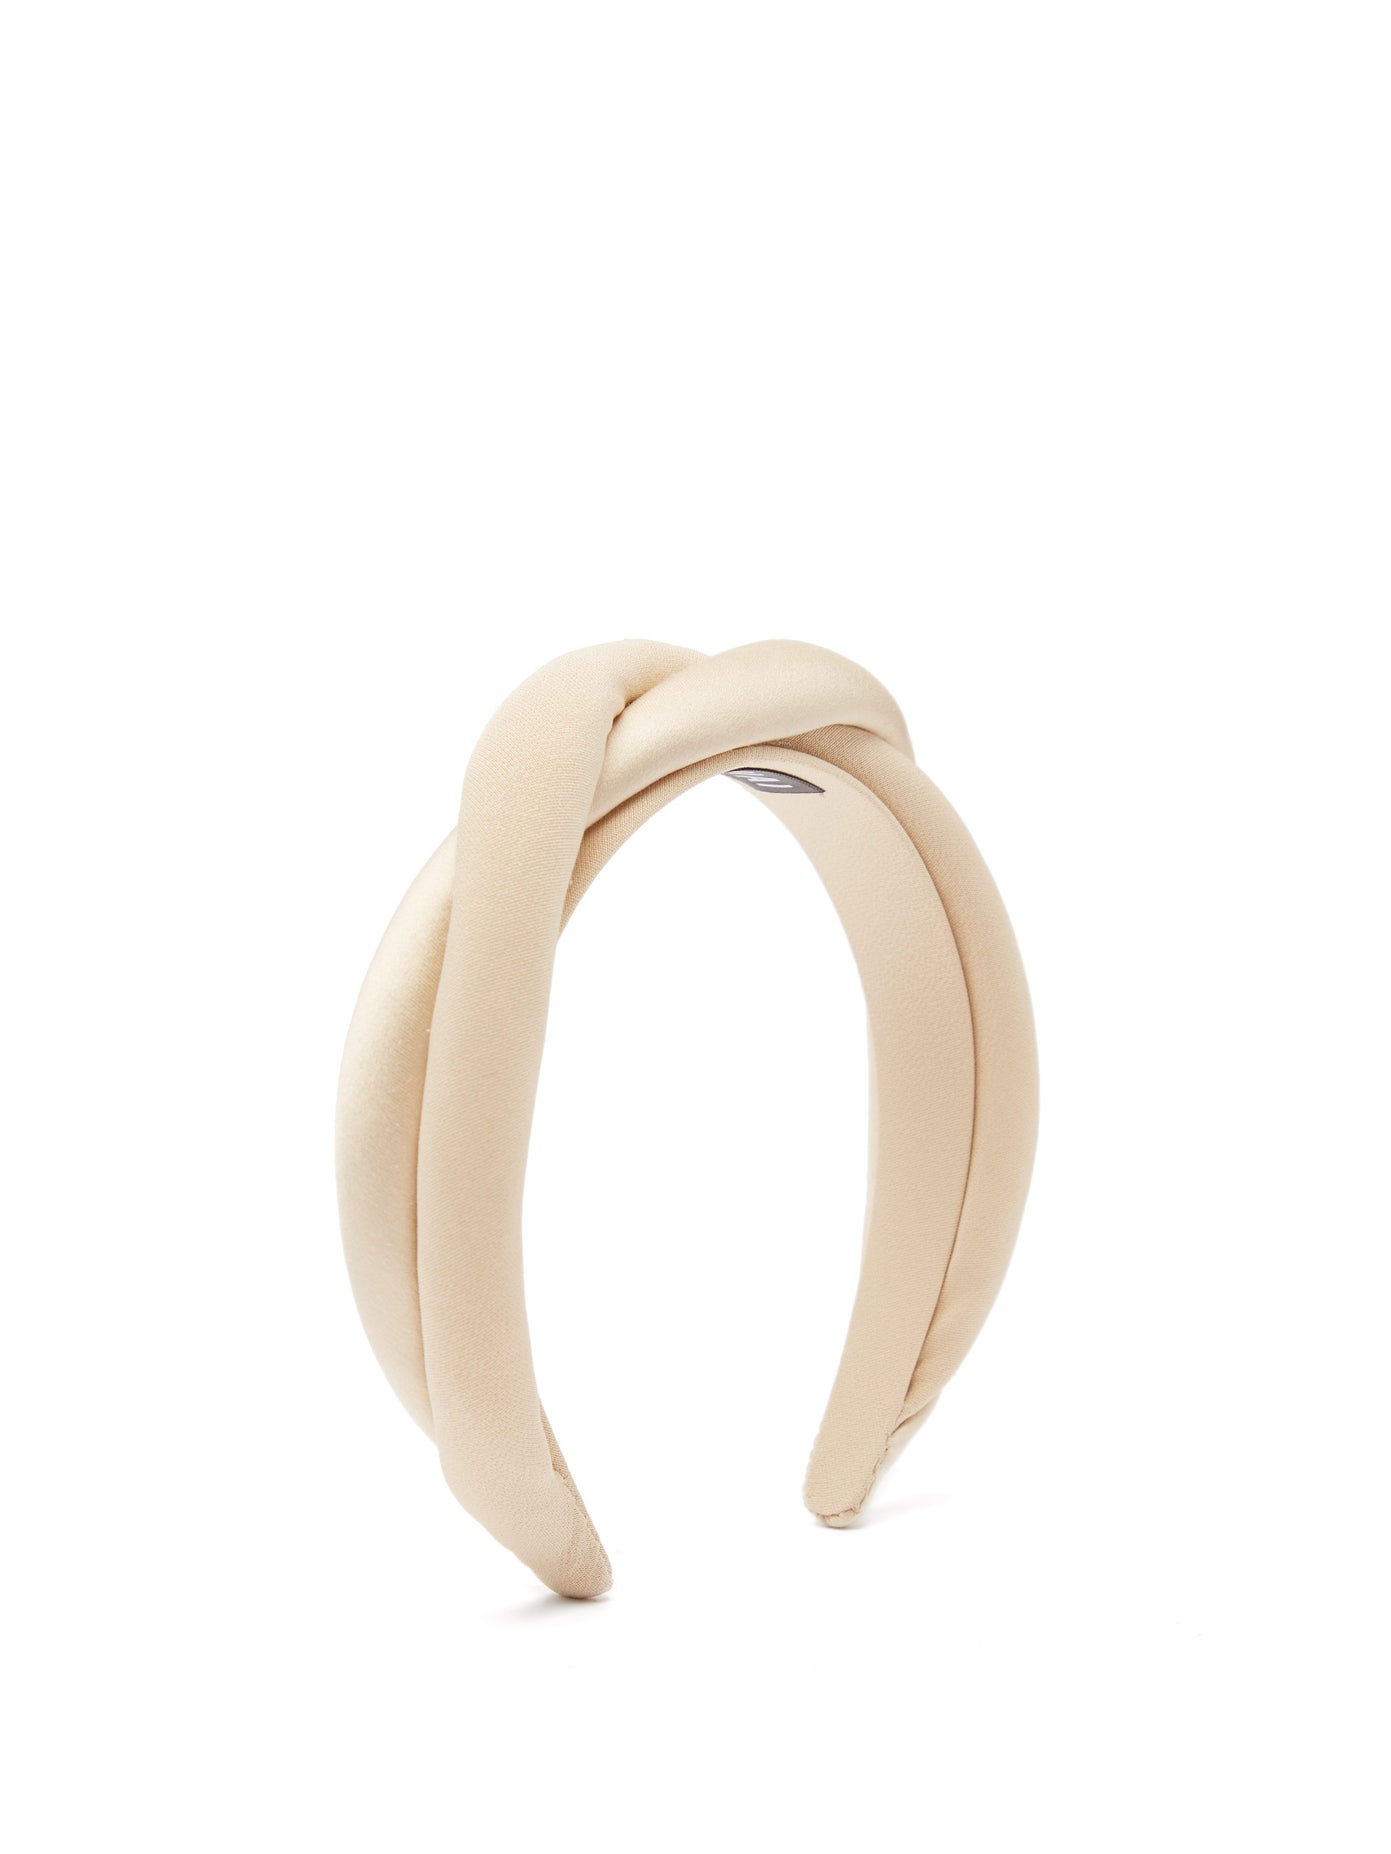 Sophie Buhai - Twisted Satin And Silk-Crepe Padded Headband | ABOUT ICONS